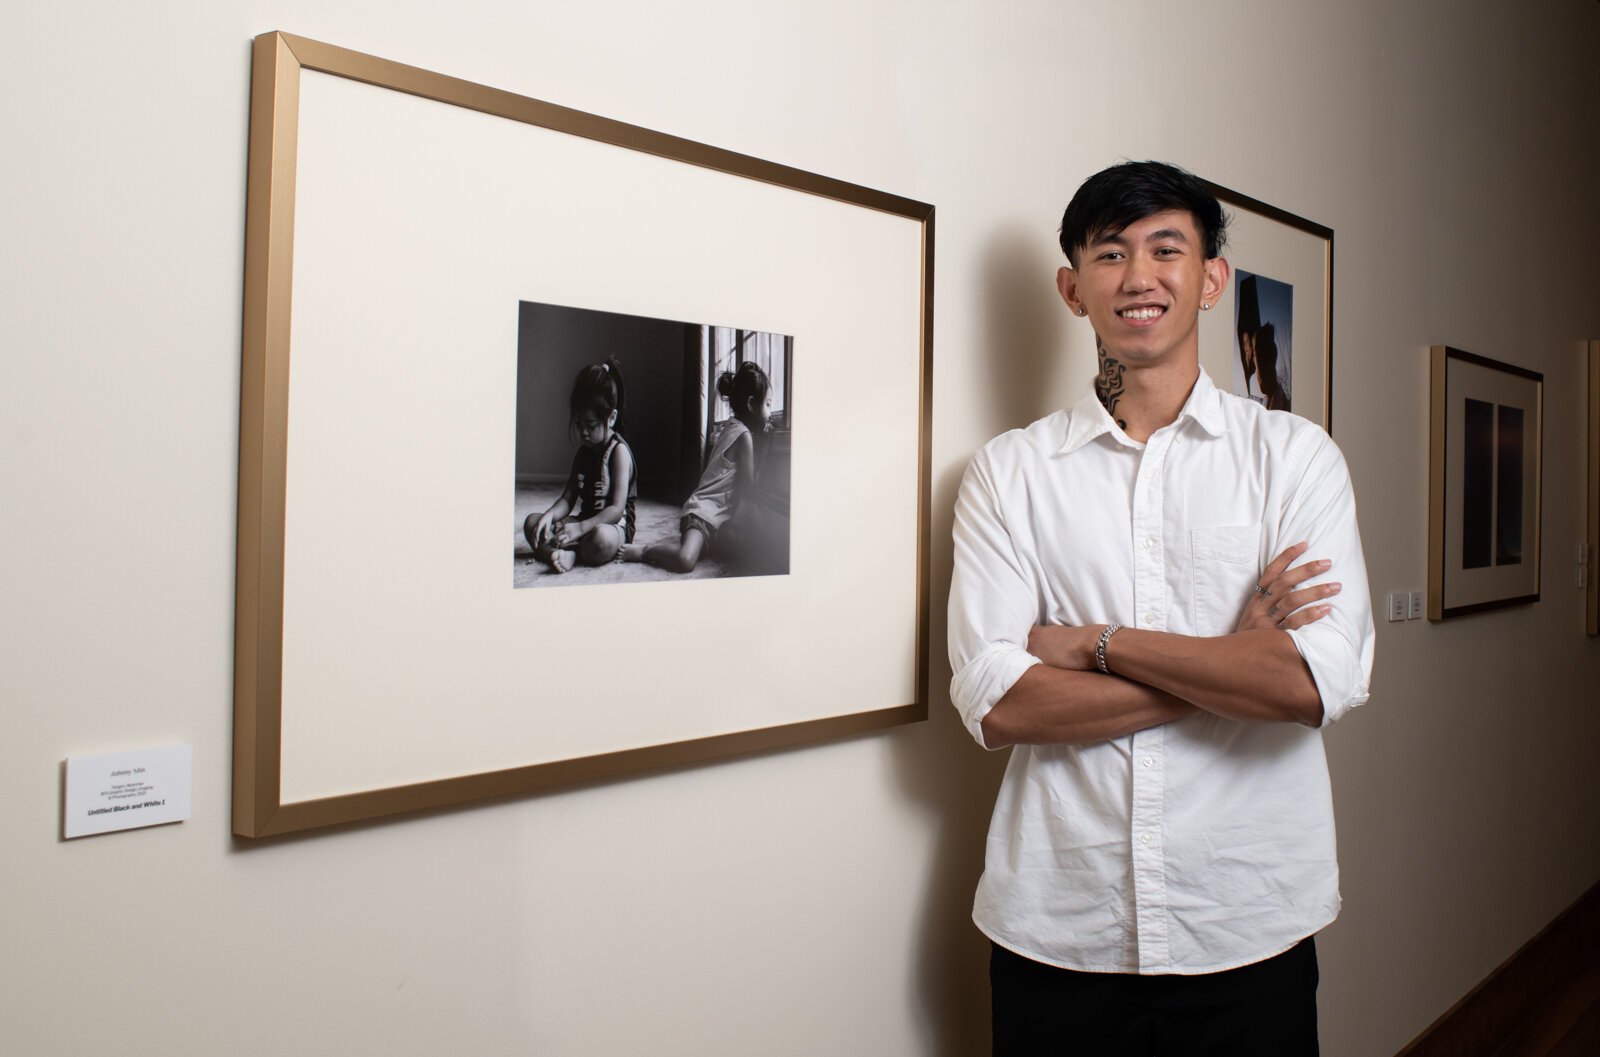 PFW graduate and artist Johnny Min in the new revolving gallery featuring work from Purdue Fort Wayne students, alumni and faculty at The Bradley.